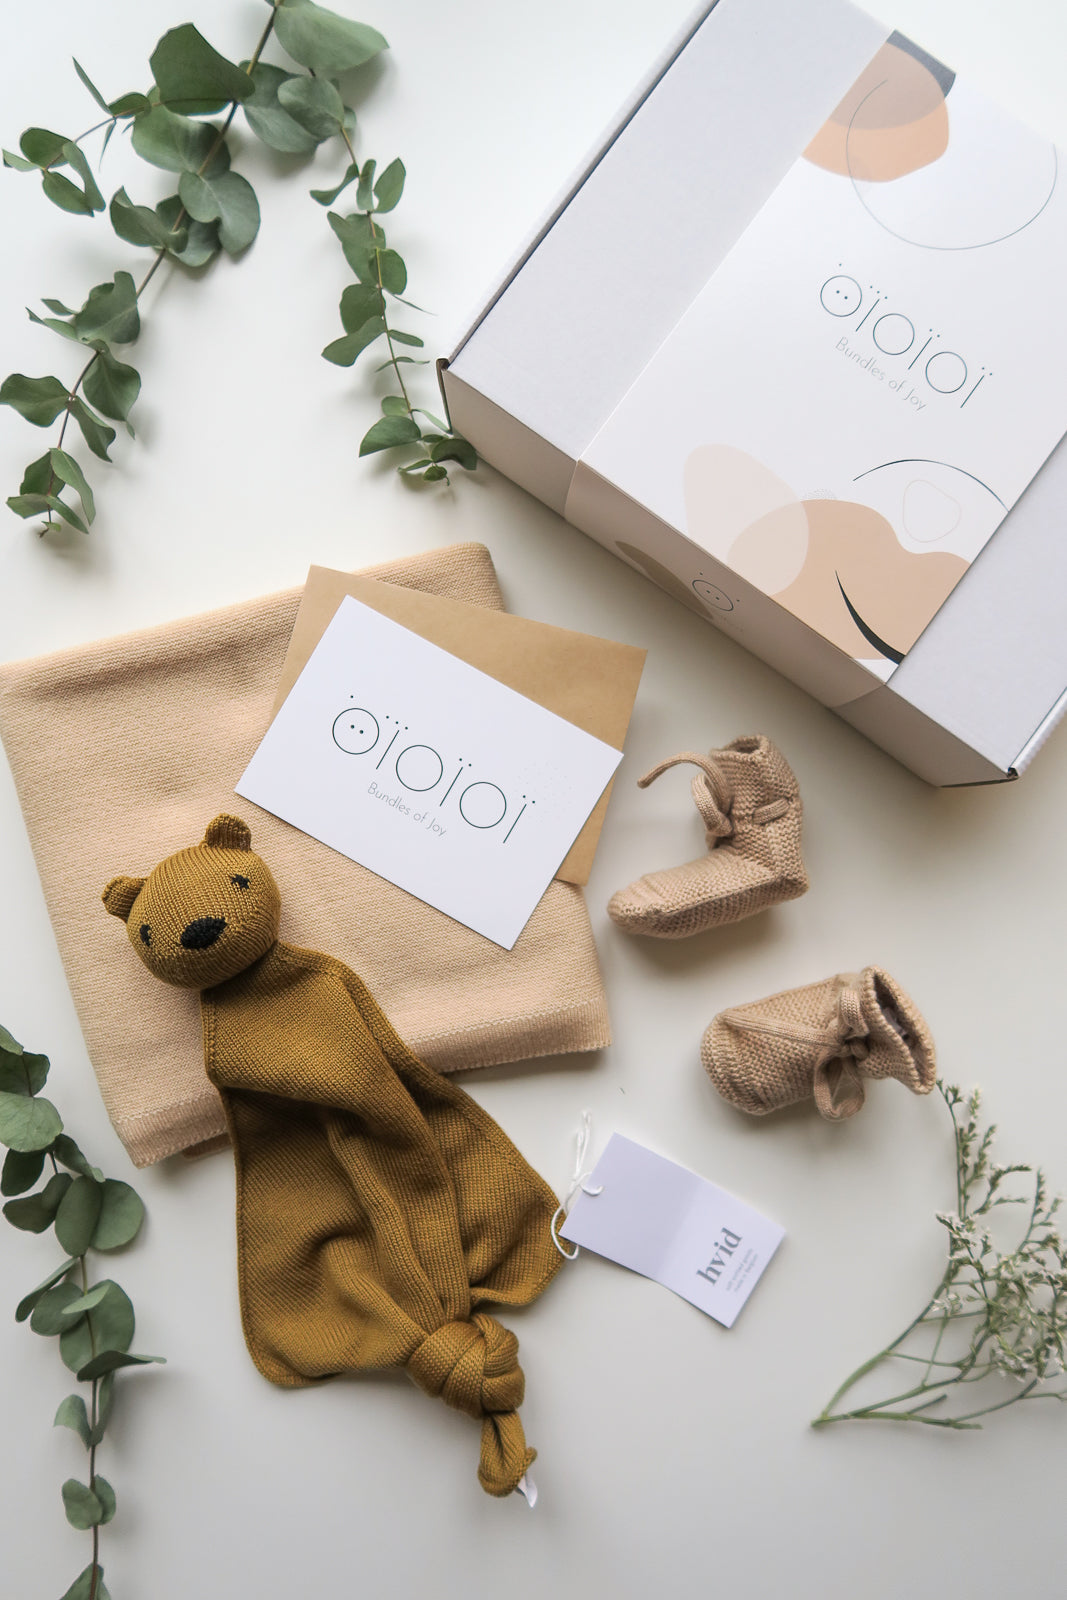 Photography from above: Gift box with OiOiOi gift card, brown cuddly toy, beige socks, lying on white background